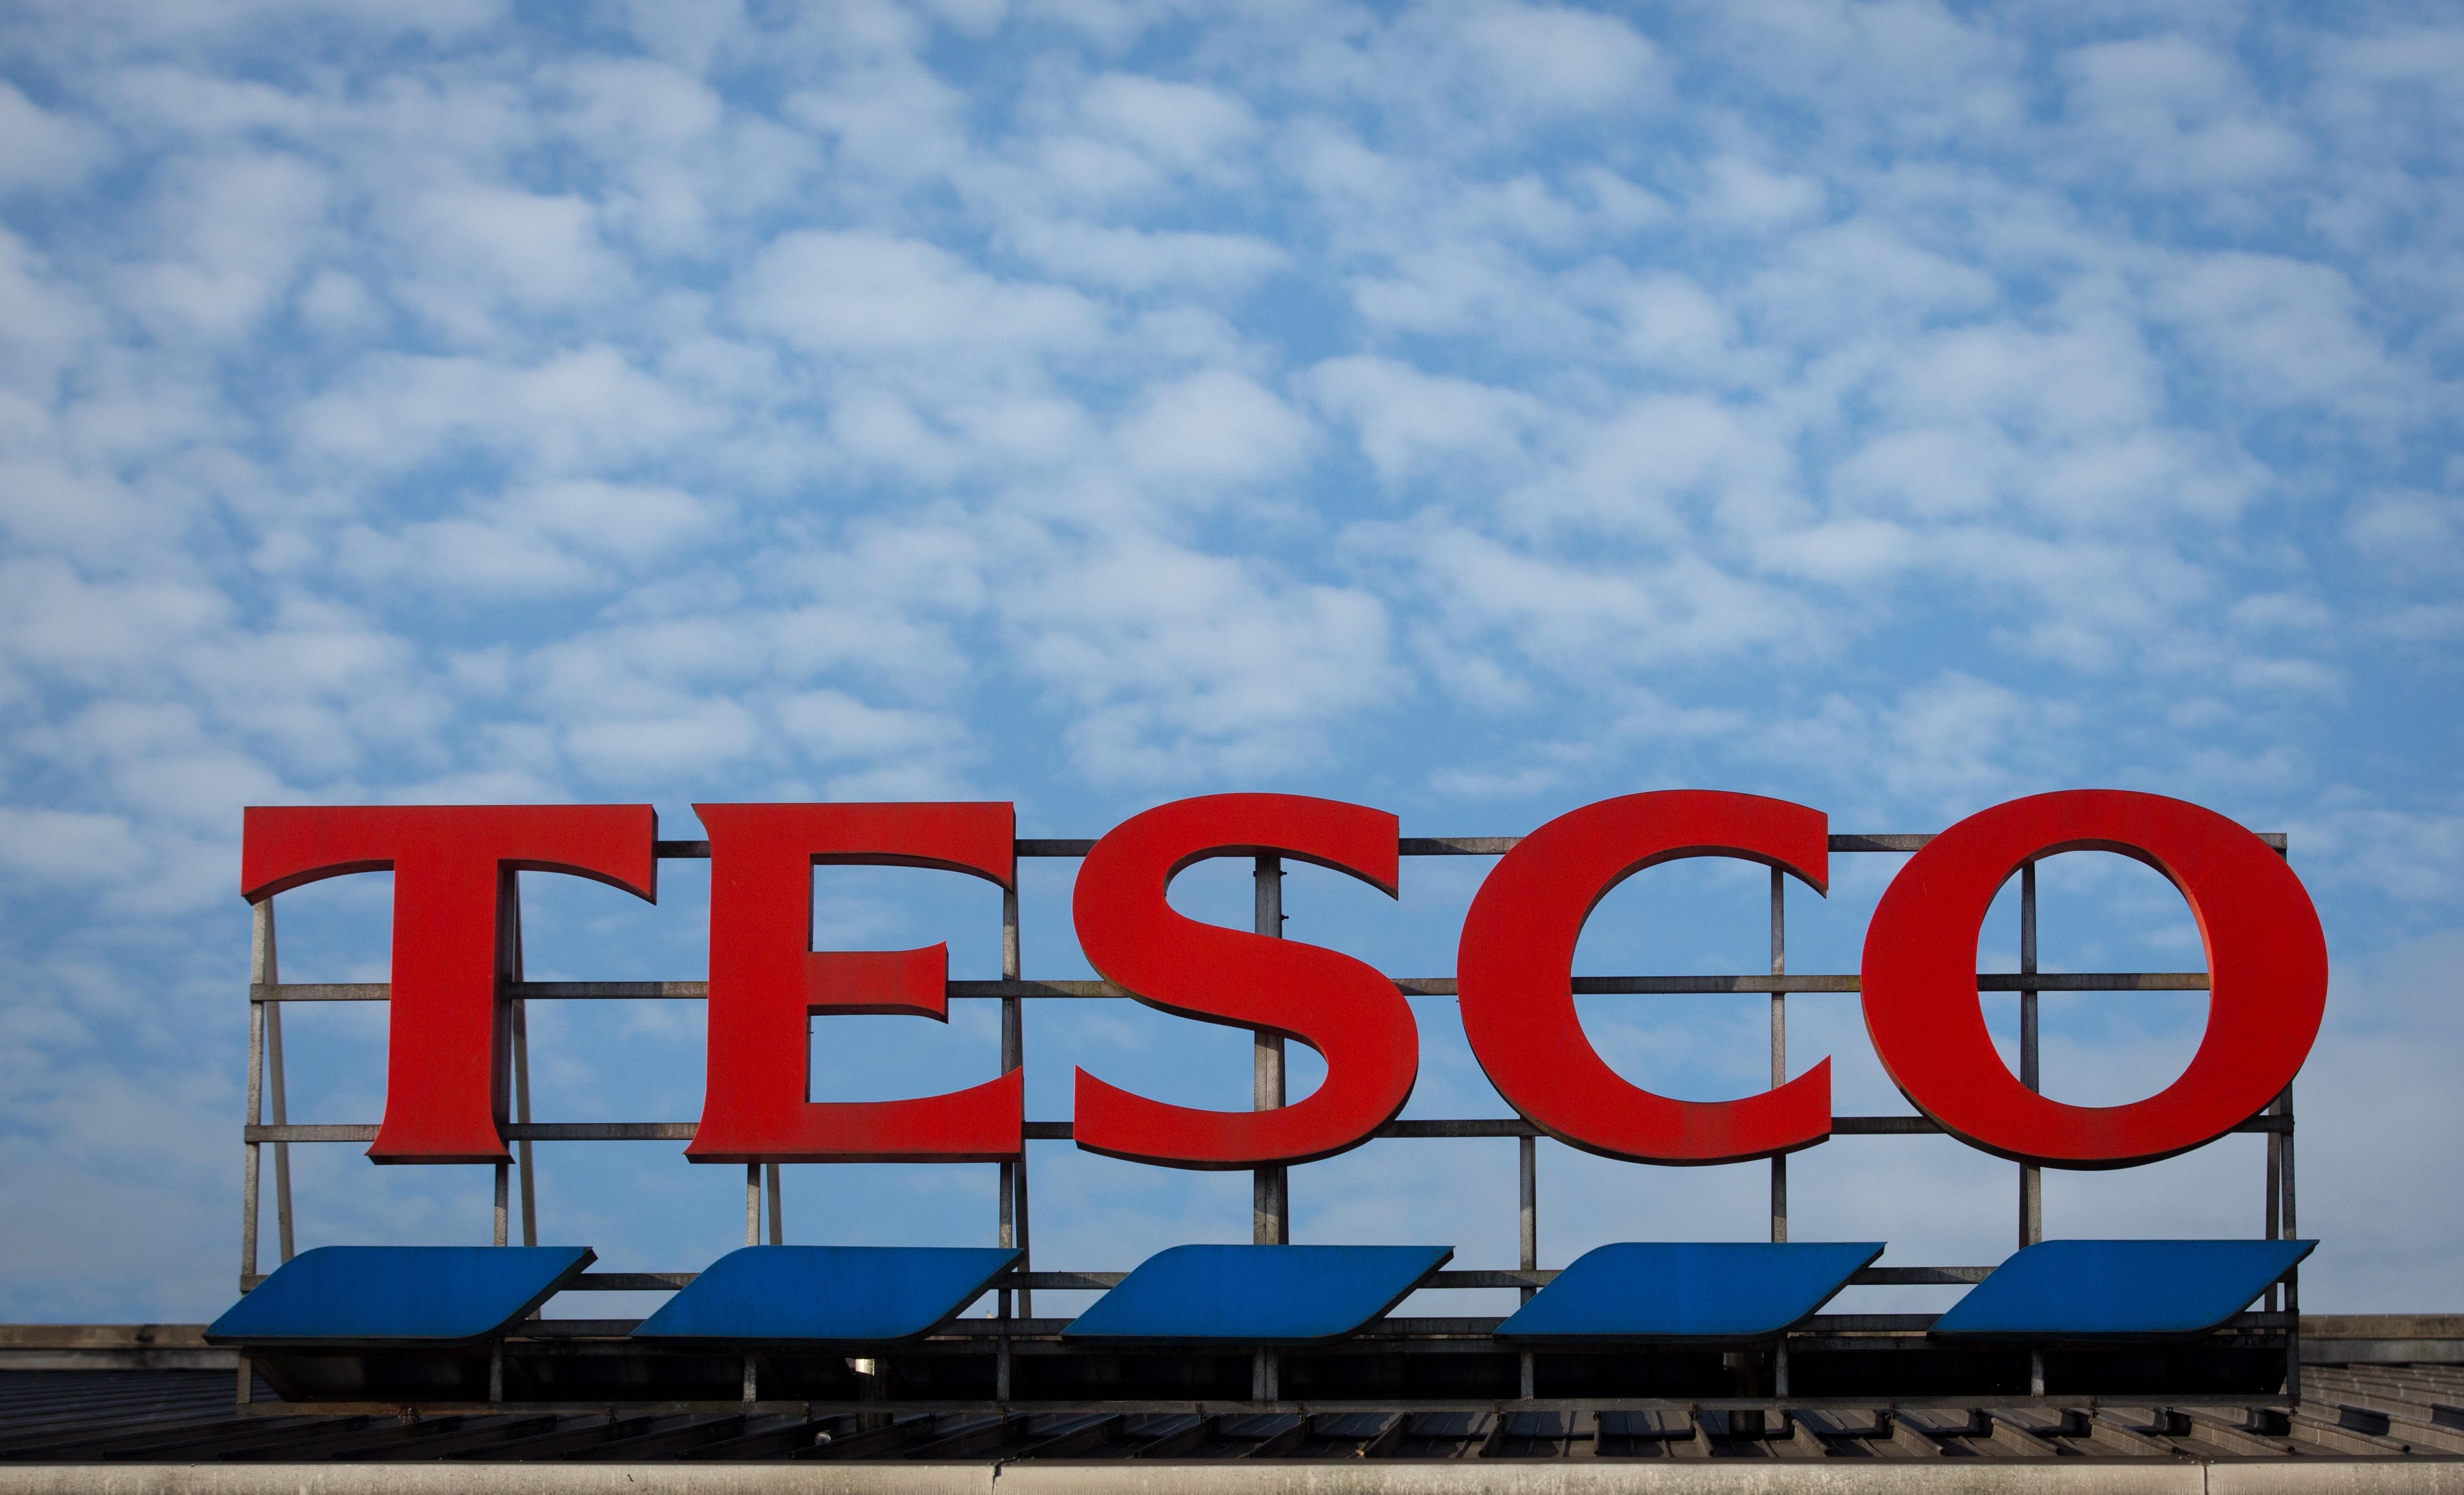 BRISTOL, ENGLAND - NOVEMBER 18: The Tesco sign is displayed outside a branch of the supermarket on November 18, 2015 in Bristol, England. As the crucial Christmas retail period approaches, all the major supermarkets are becoming increasingly competitive to retain and increase their share of the market. (Photo by Matt Cardy/Getty Images)